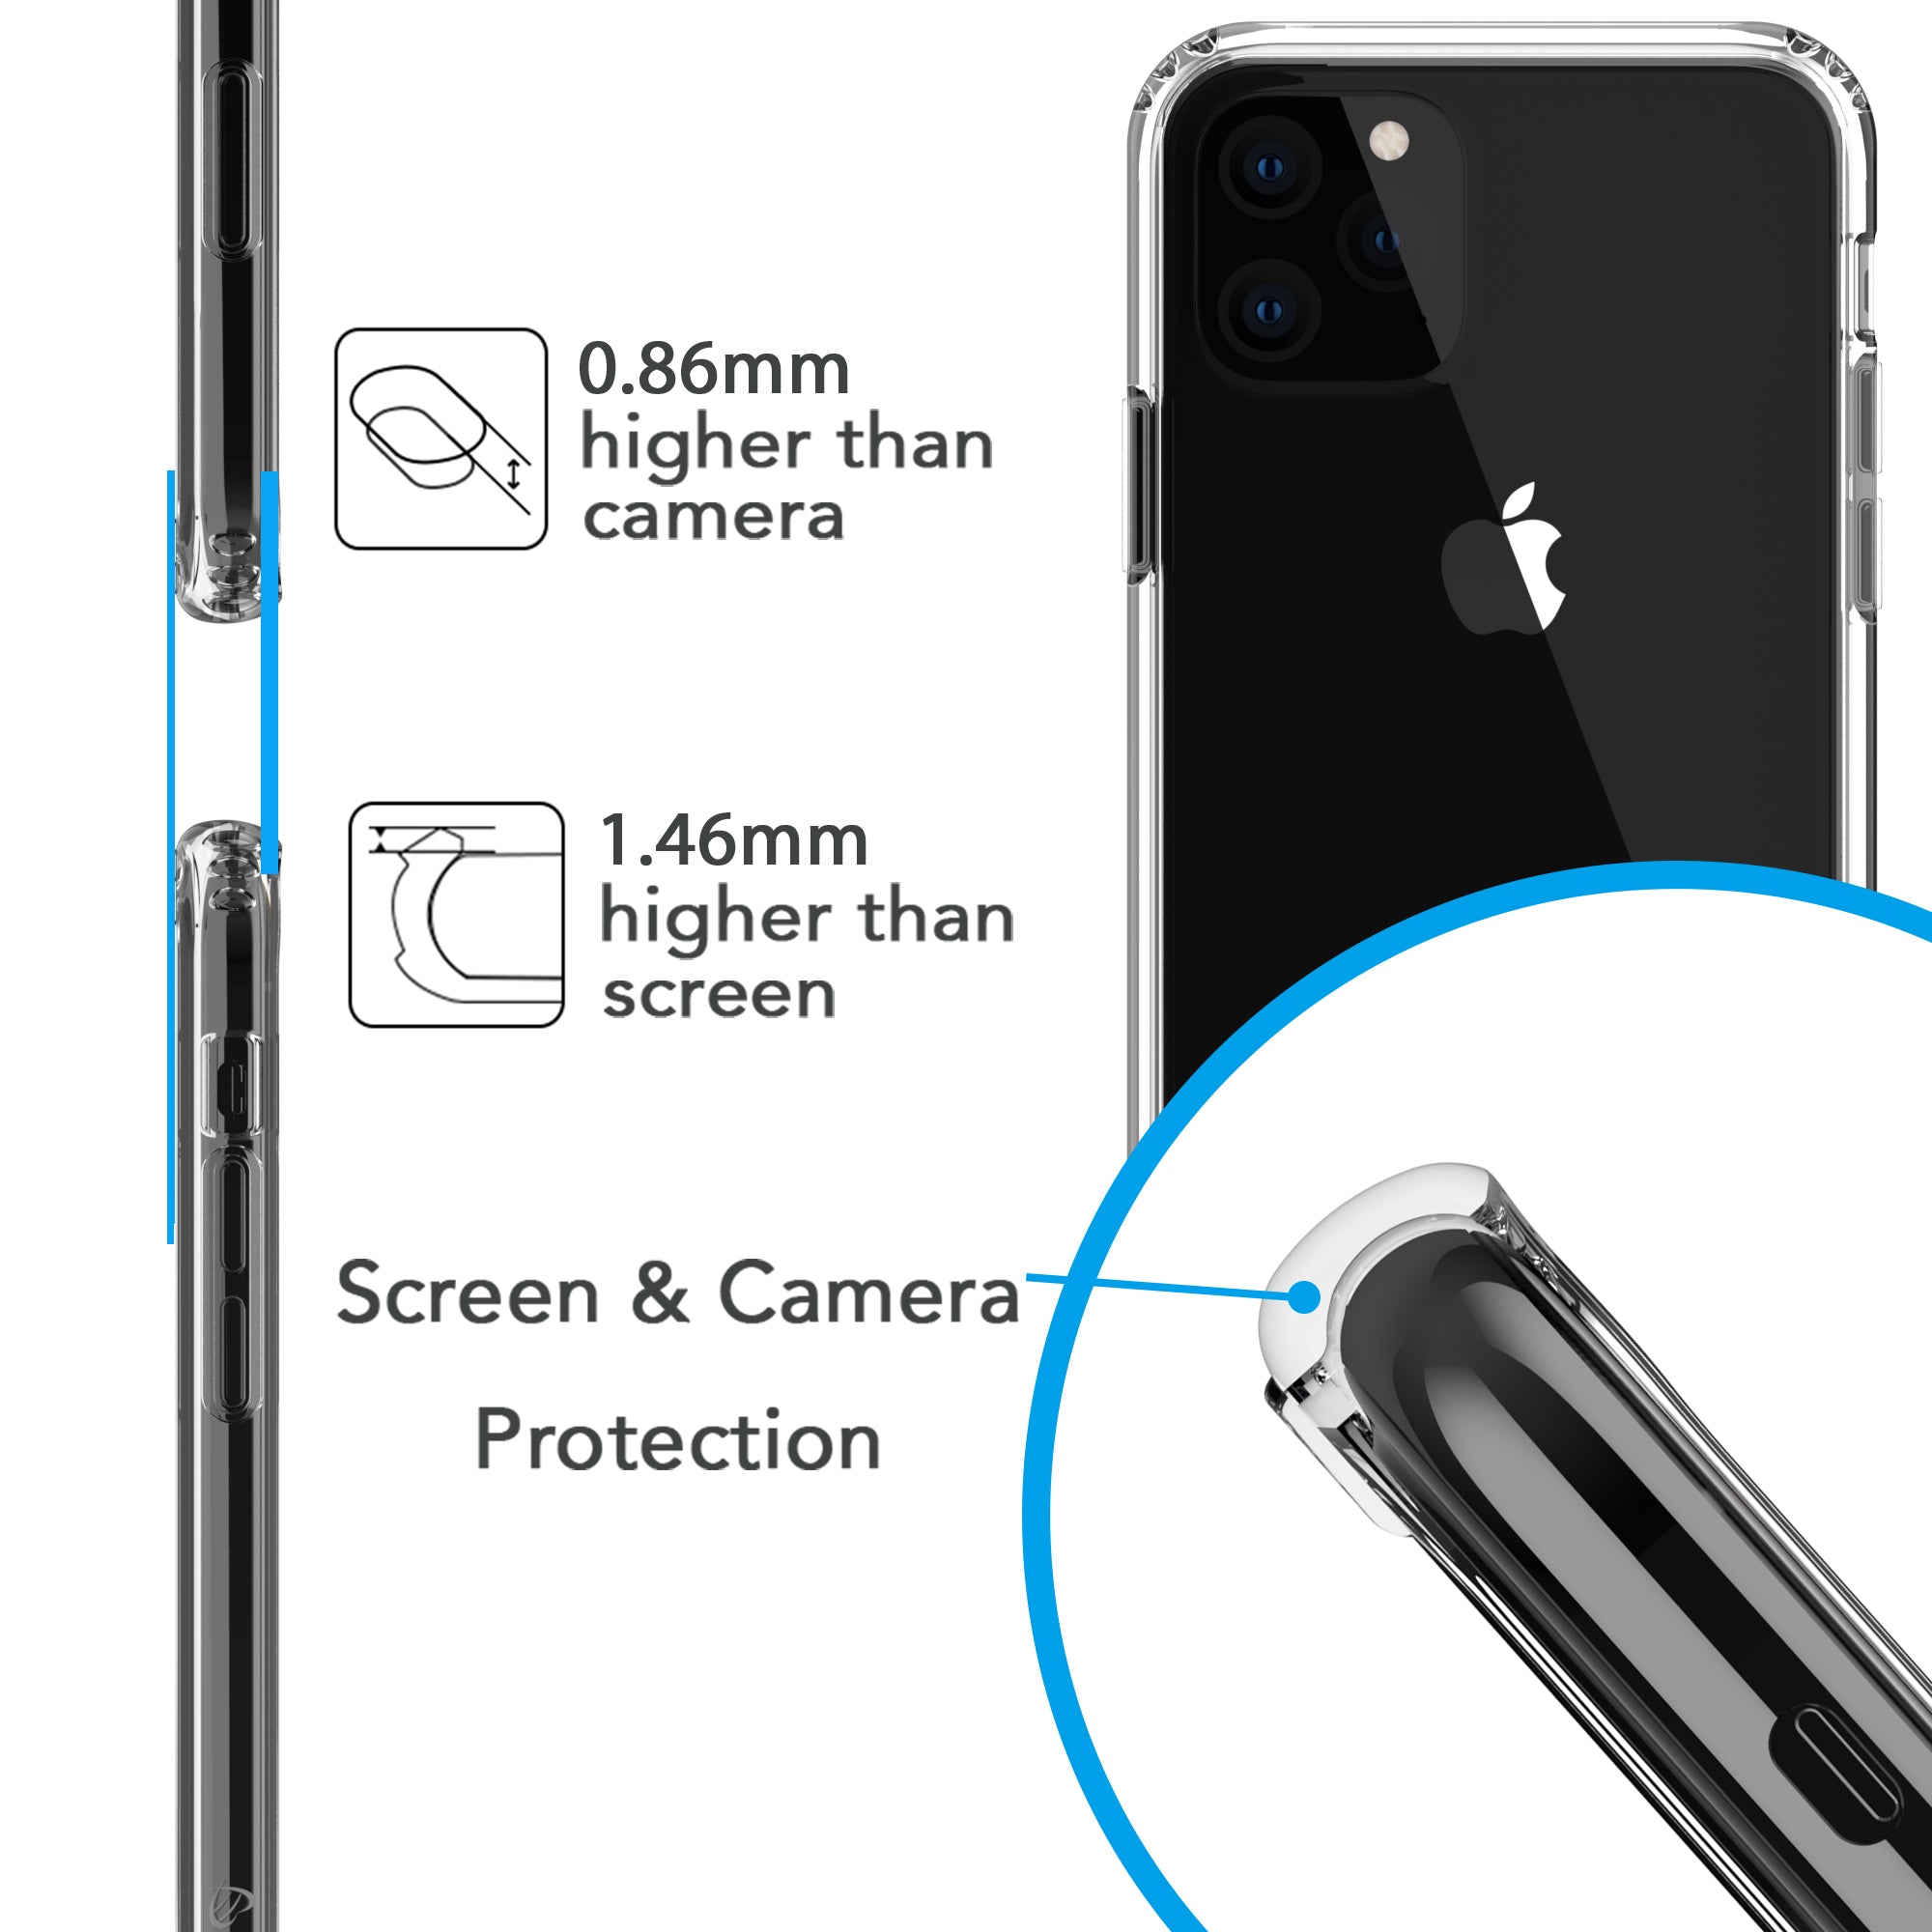 Luvvitt Clear View Case and Liquid Glass Screen Protector Bundle for iPhone 11 Pro 2019